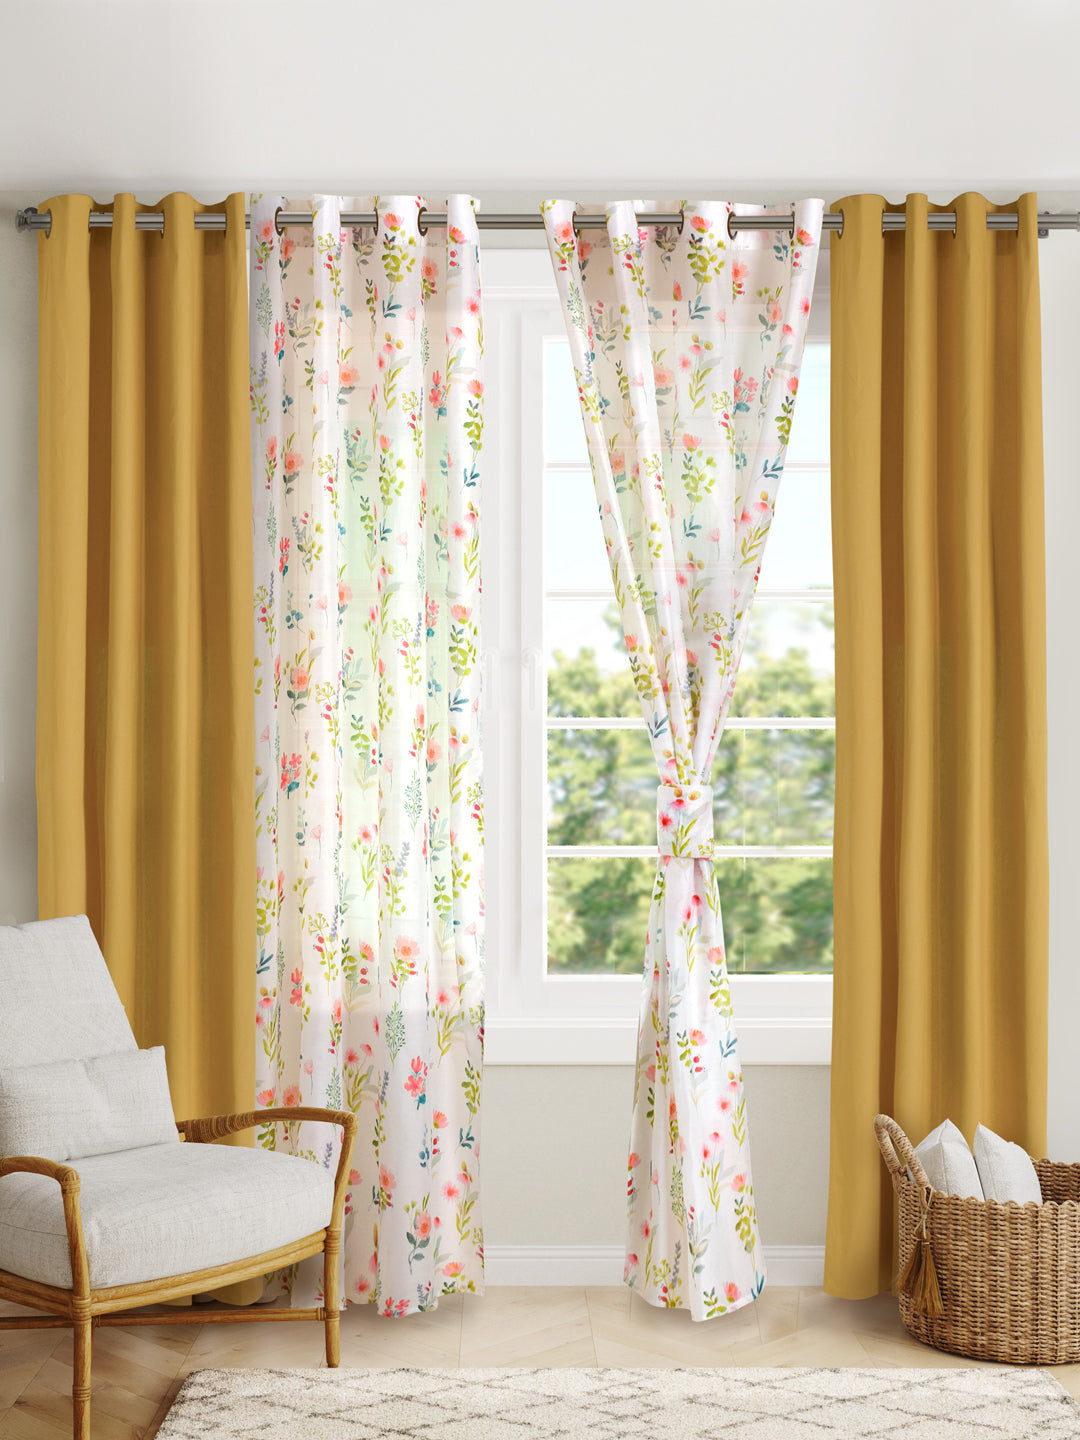 Set Of 4 Flora Printed With Mustard Plain 7Ft. Curtains